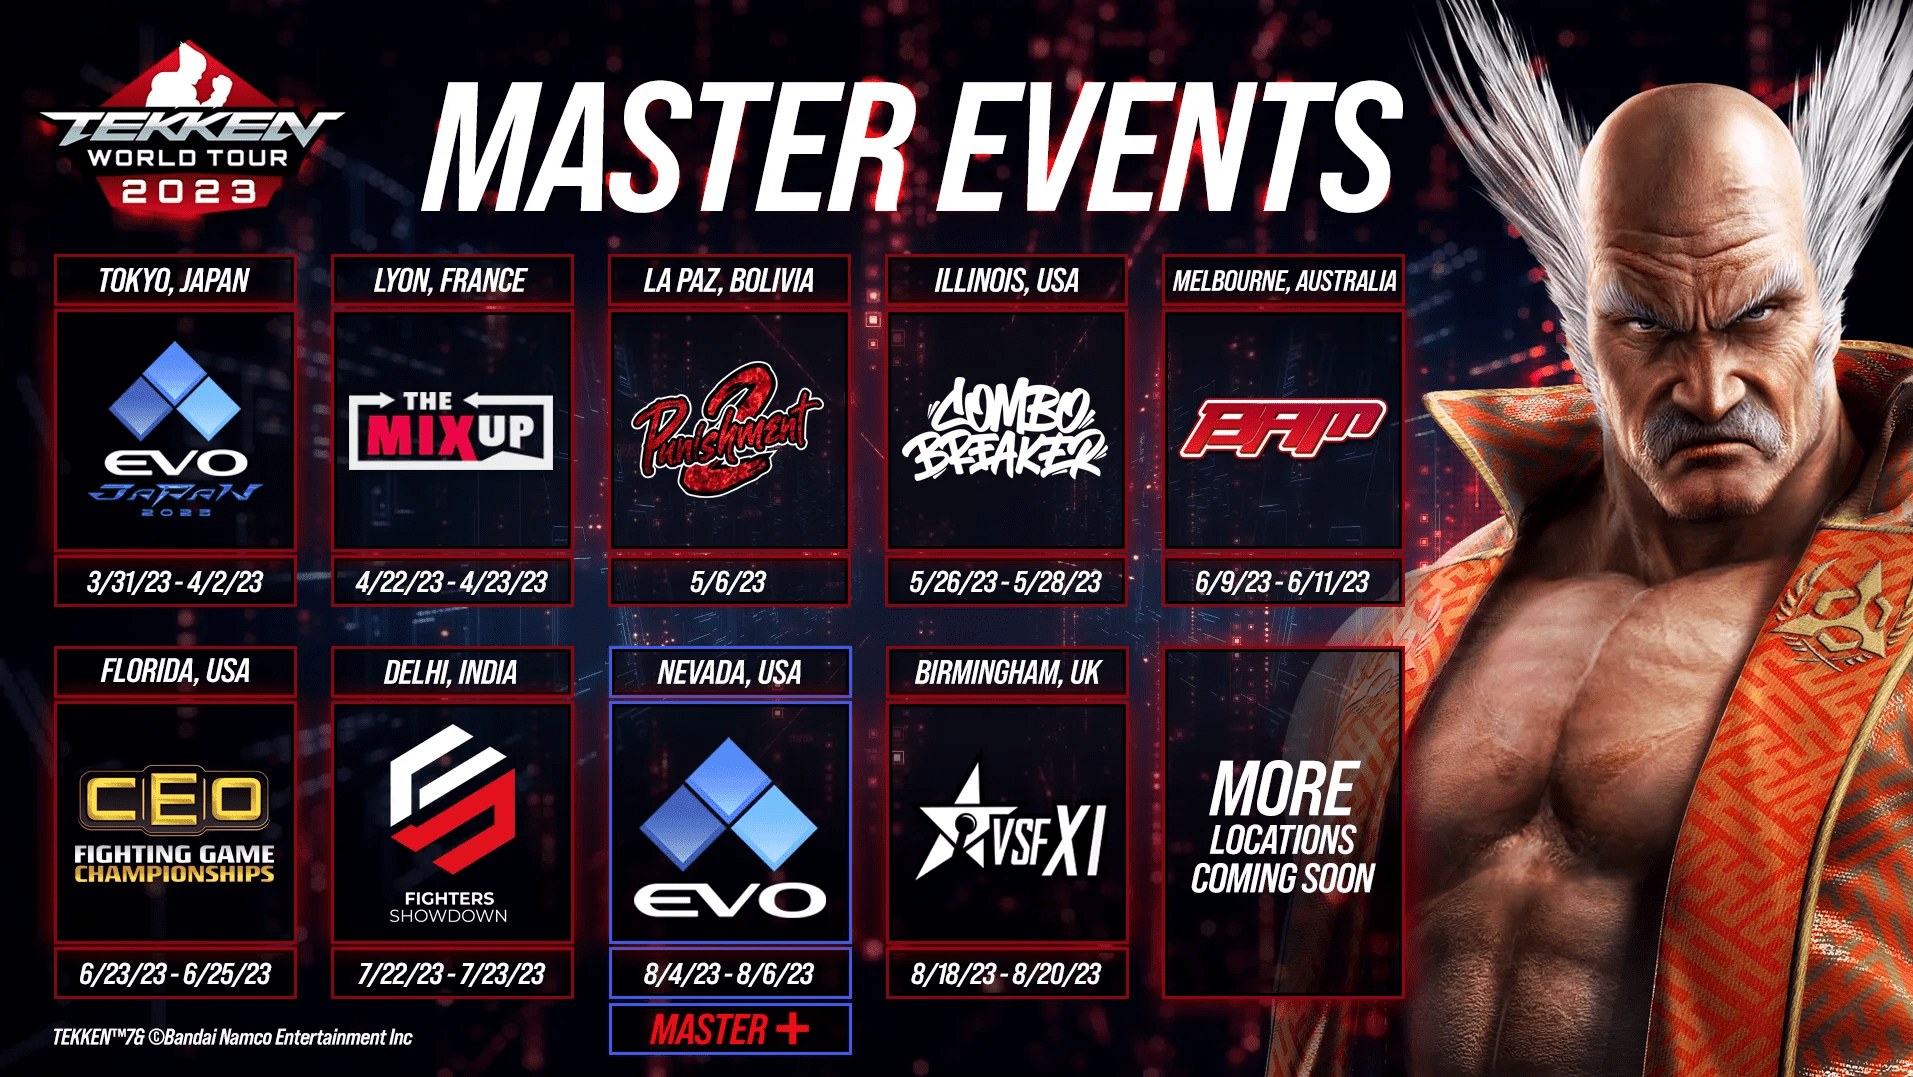 Evo and CEO 2023 named TEKKEN World Tour 2023 Master events